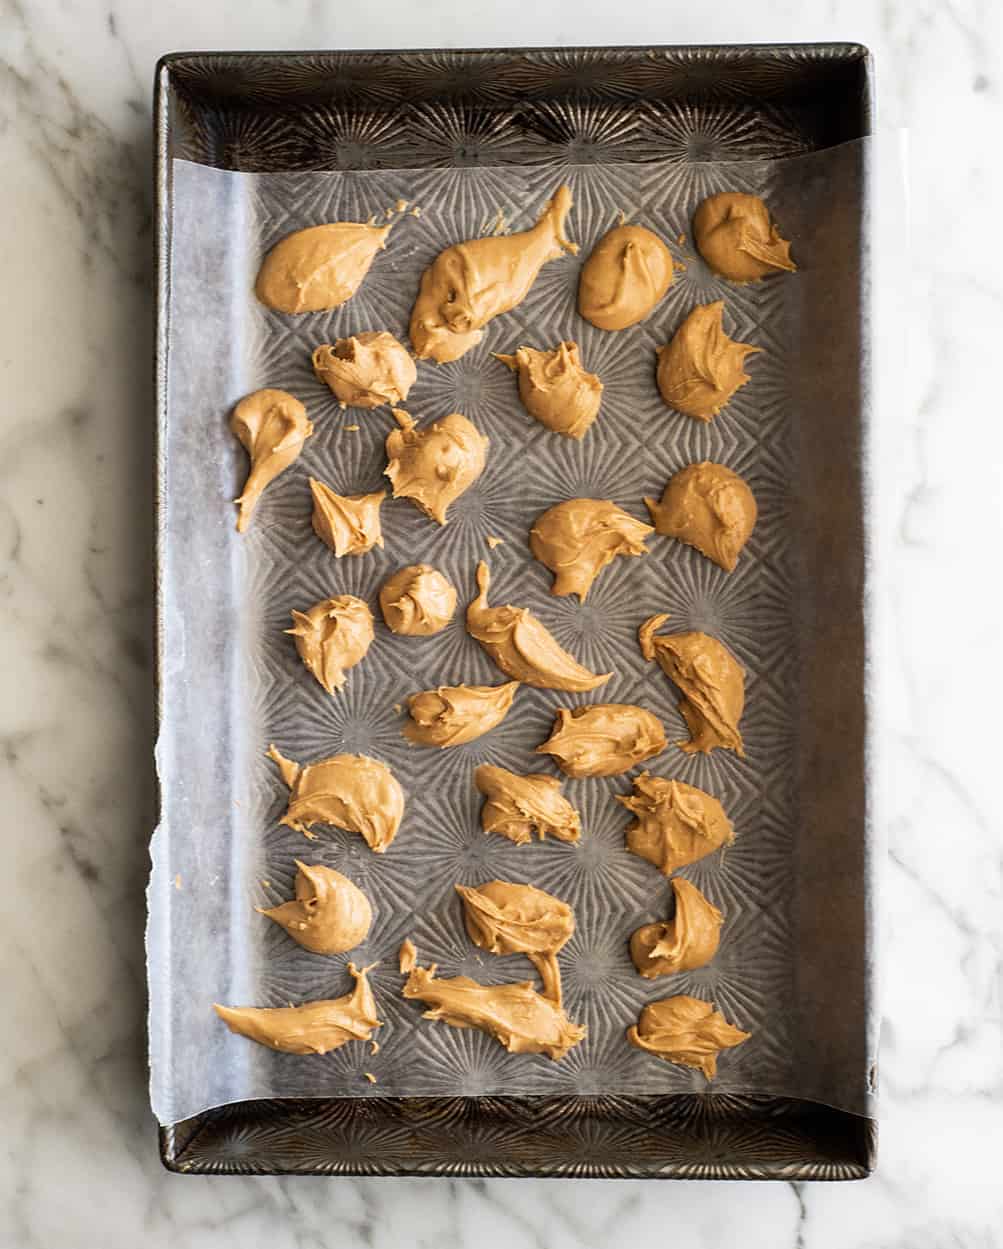 peanut butter chunks on a baking sheet & wax paper to make chocolate peanut butter ice cream